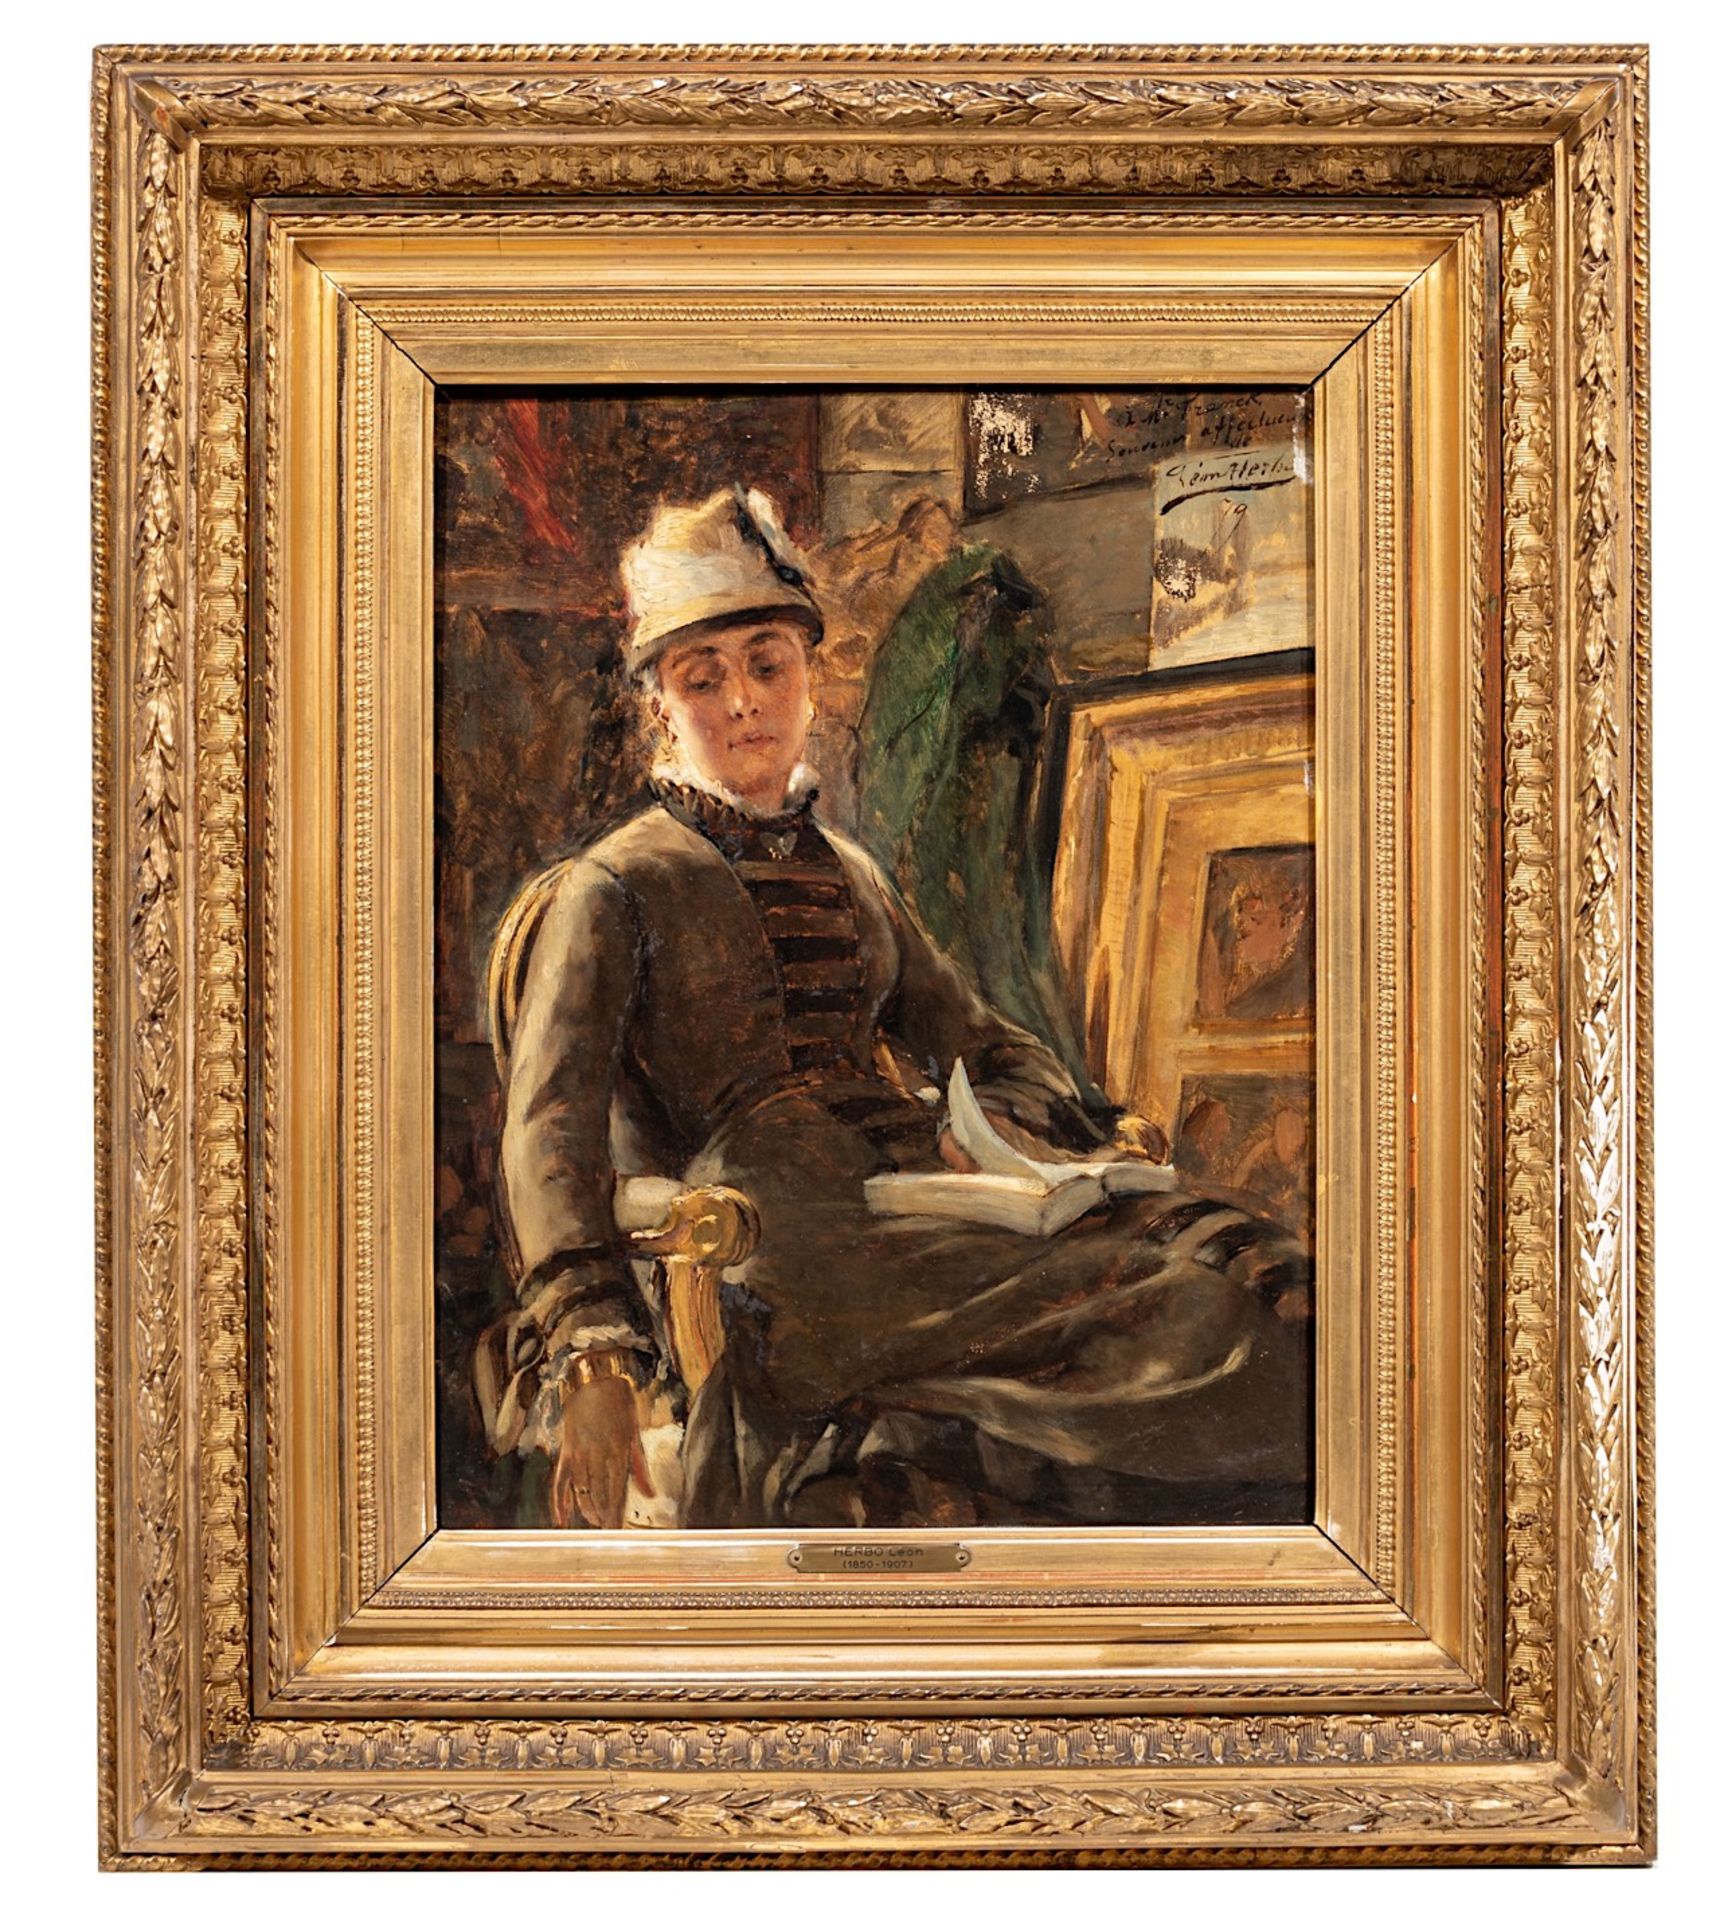 Leon Herbo (1850-1907), portrait of Mme Franck reading in an interior, 1879, oil on mahogany 42 x 32 - Image 2 of 5